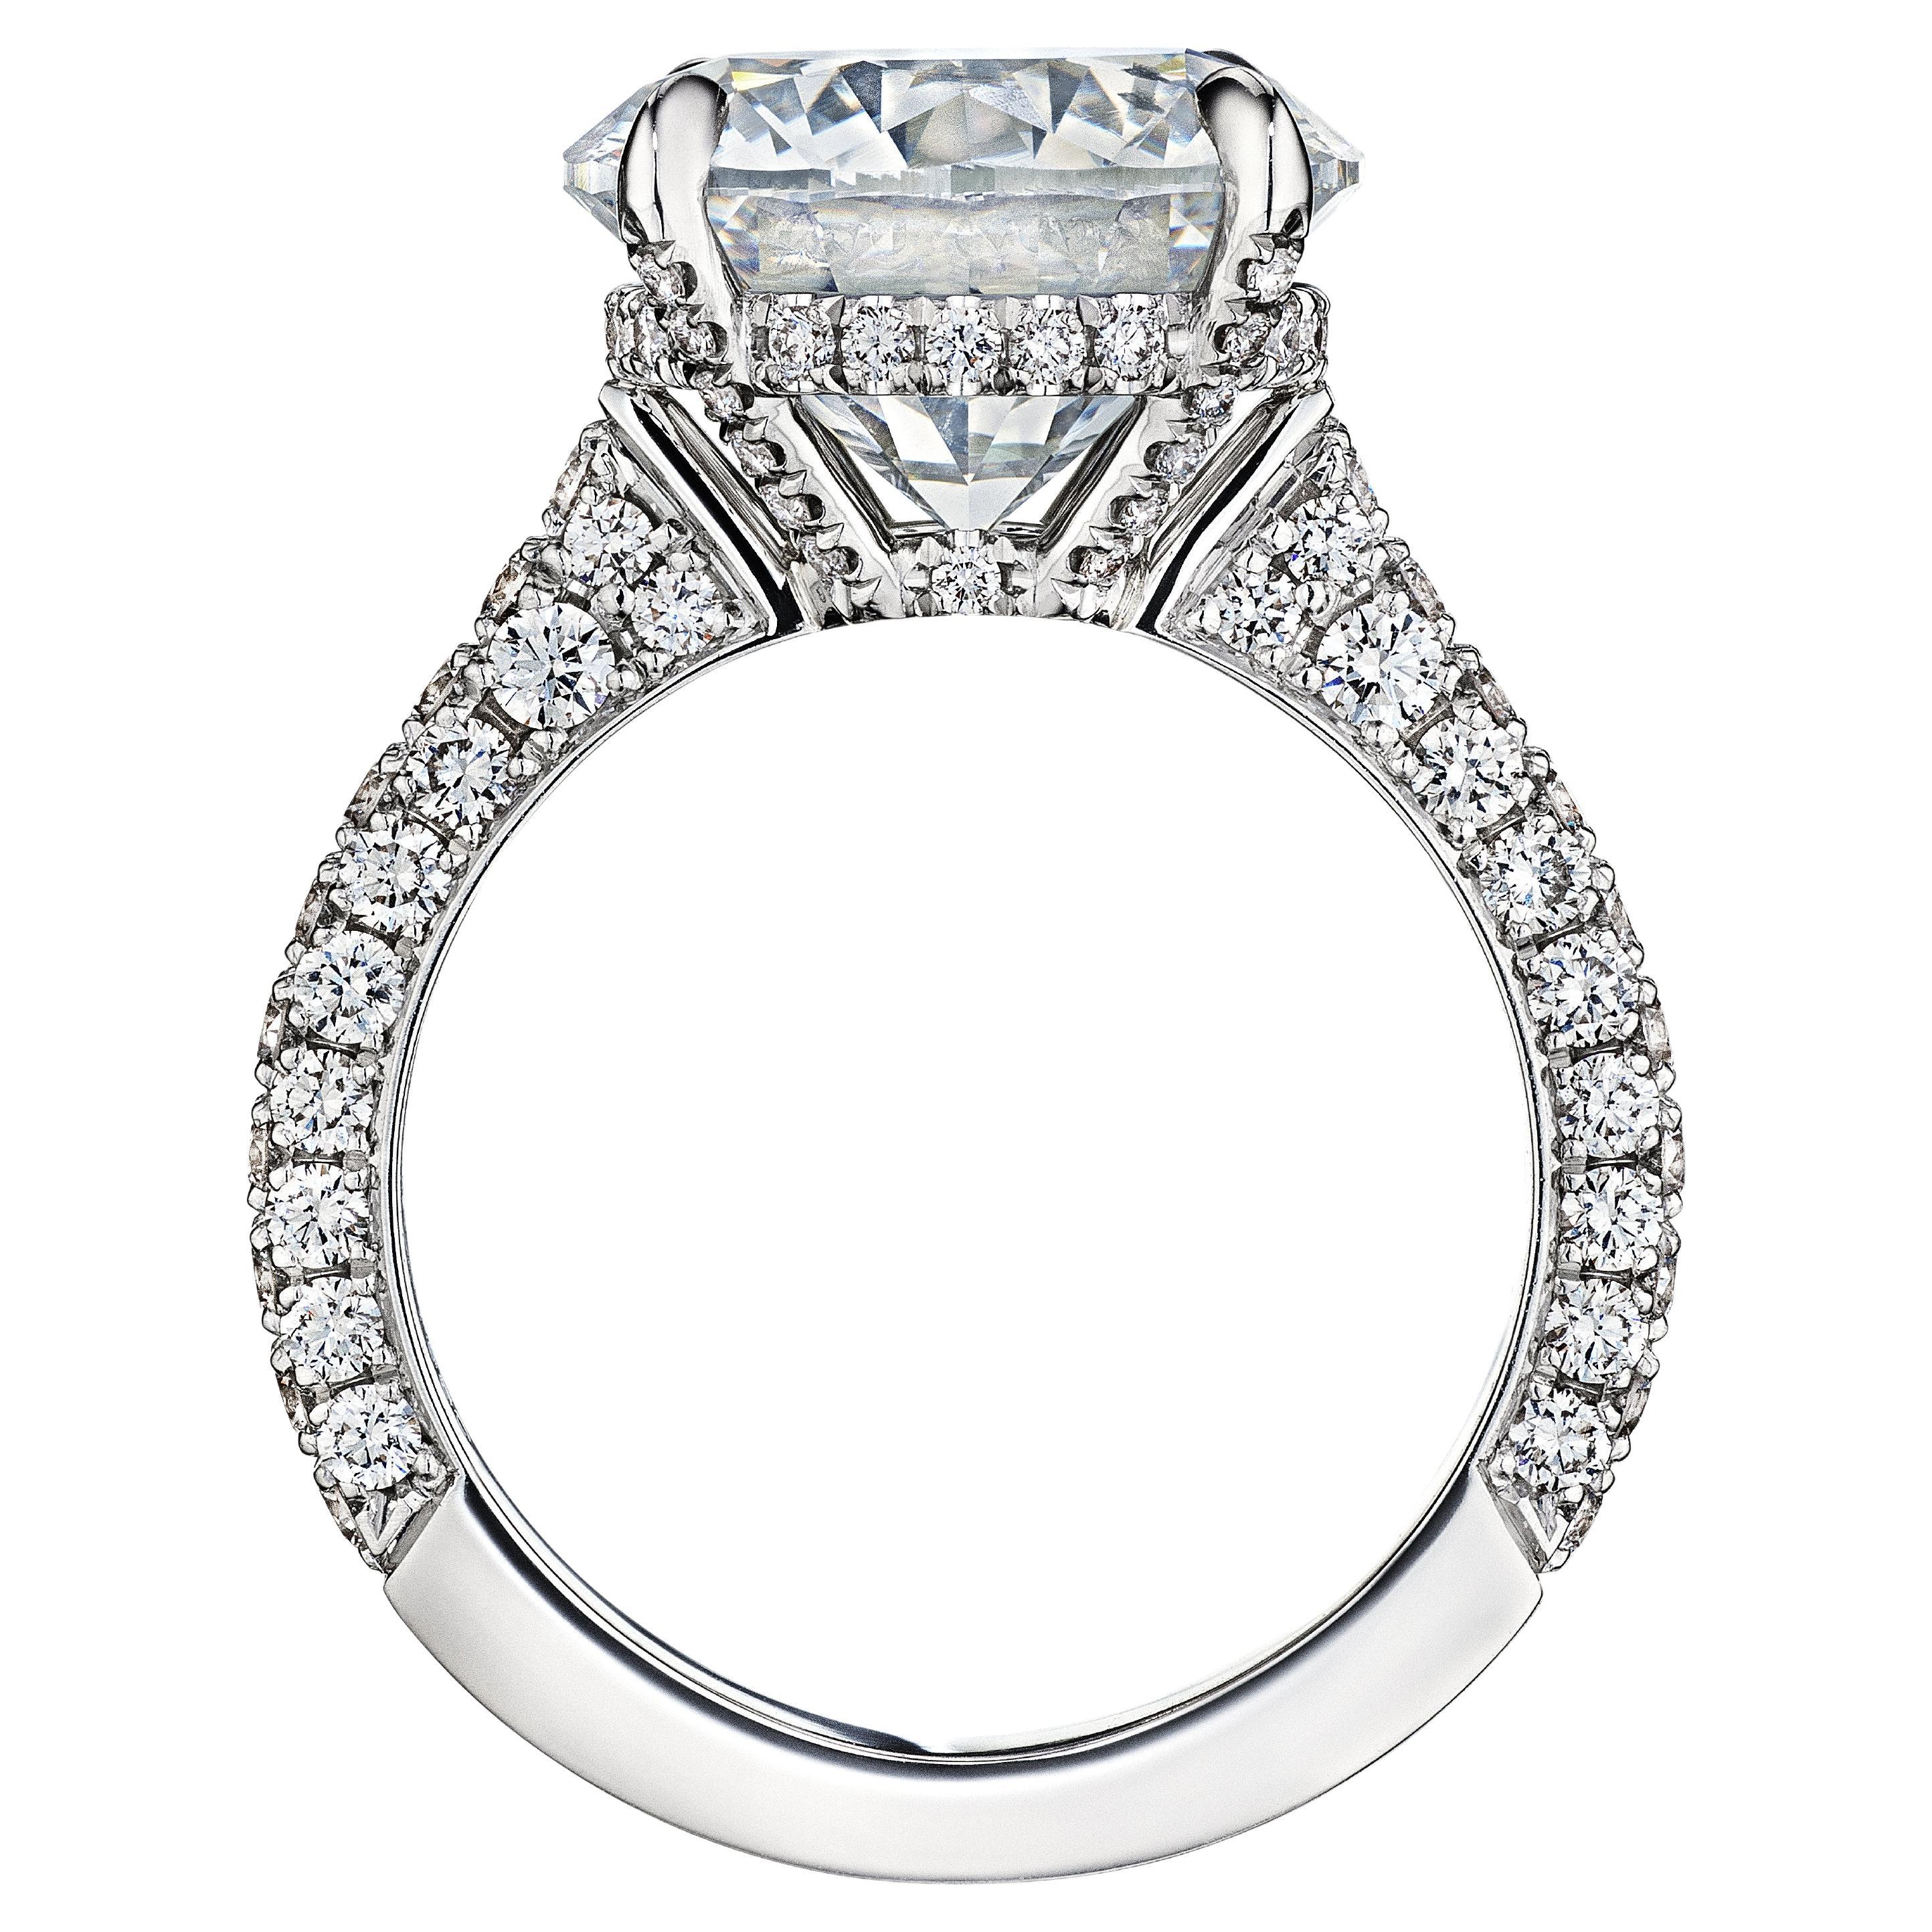 For Sale:  GIA Certified 5.00 Carat D VS2 GIA Round Diamond Engagement Ring "Christina"